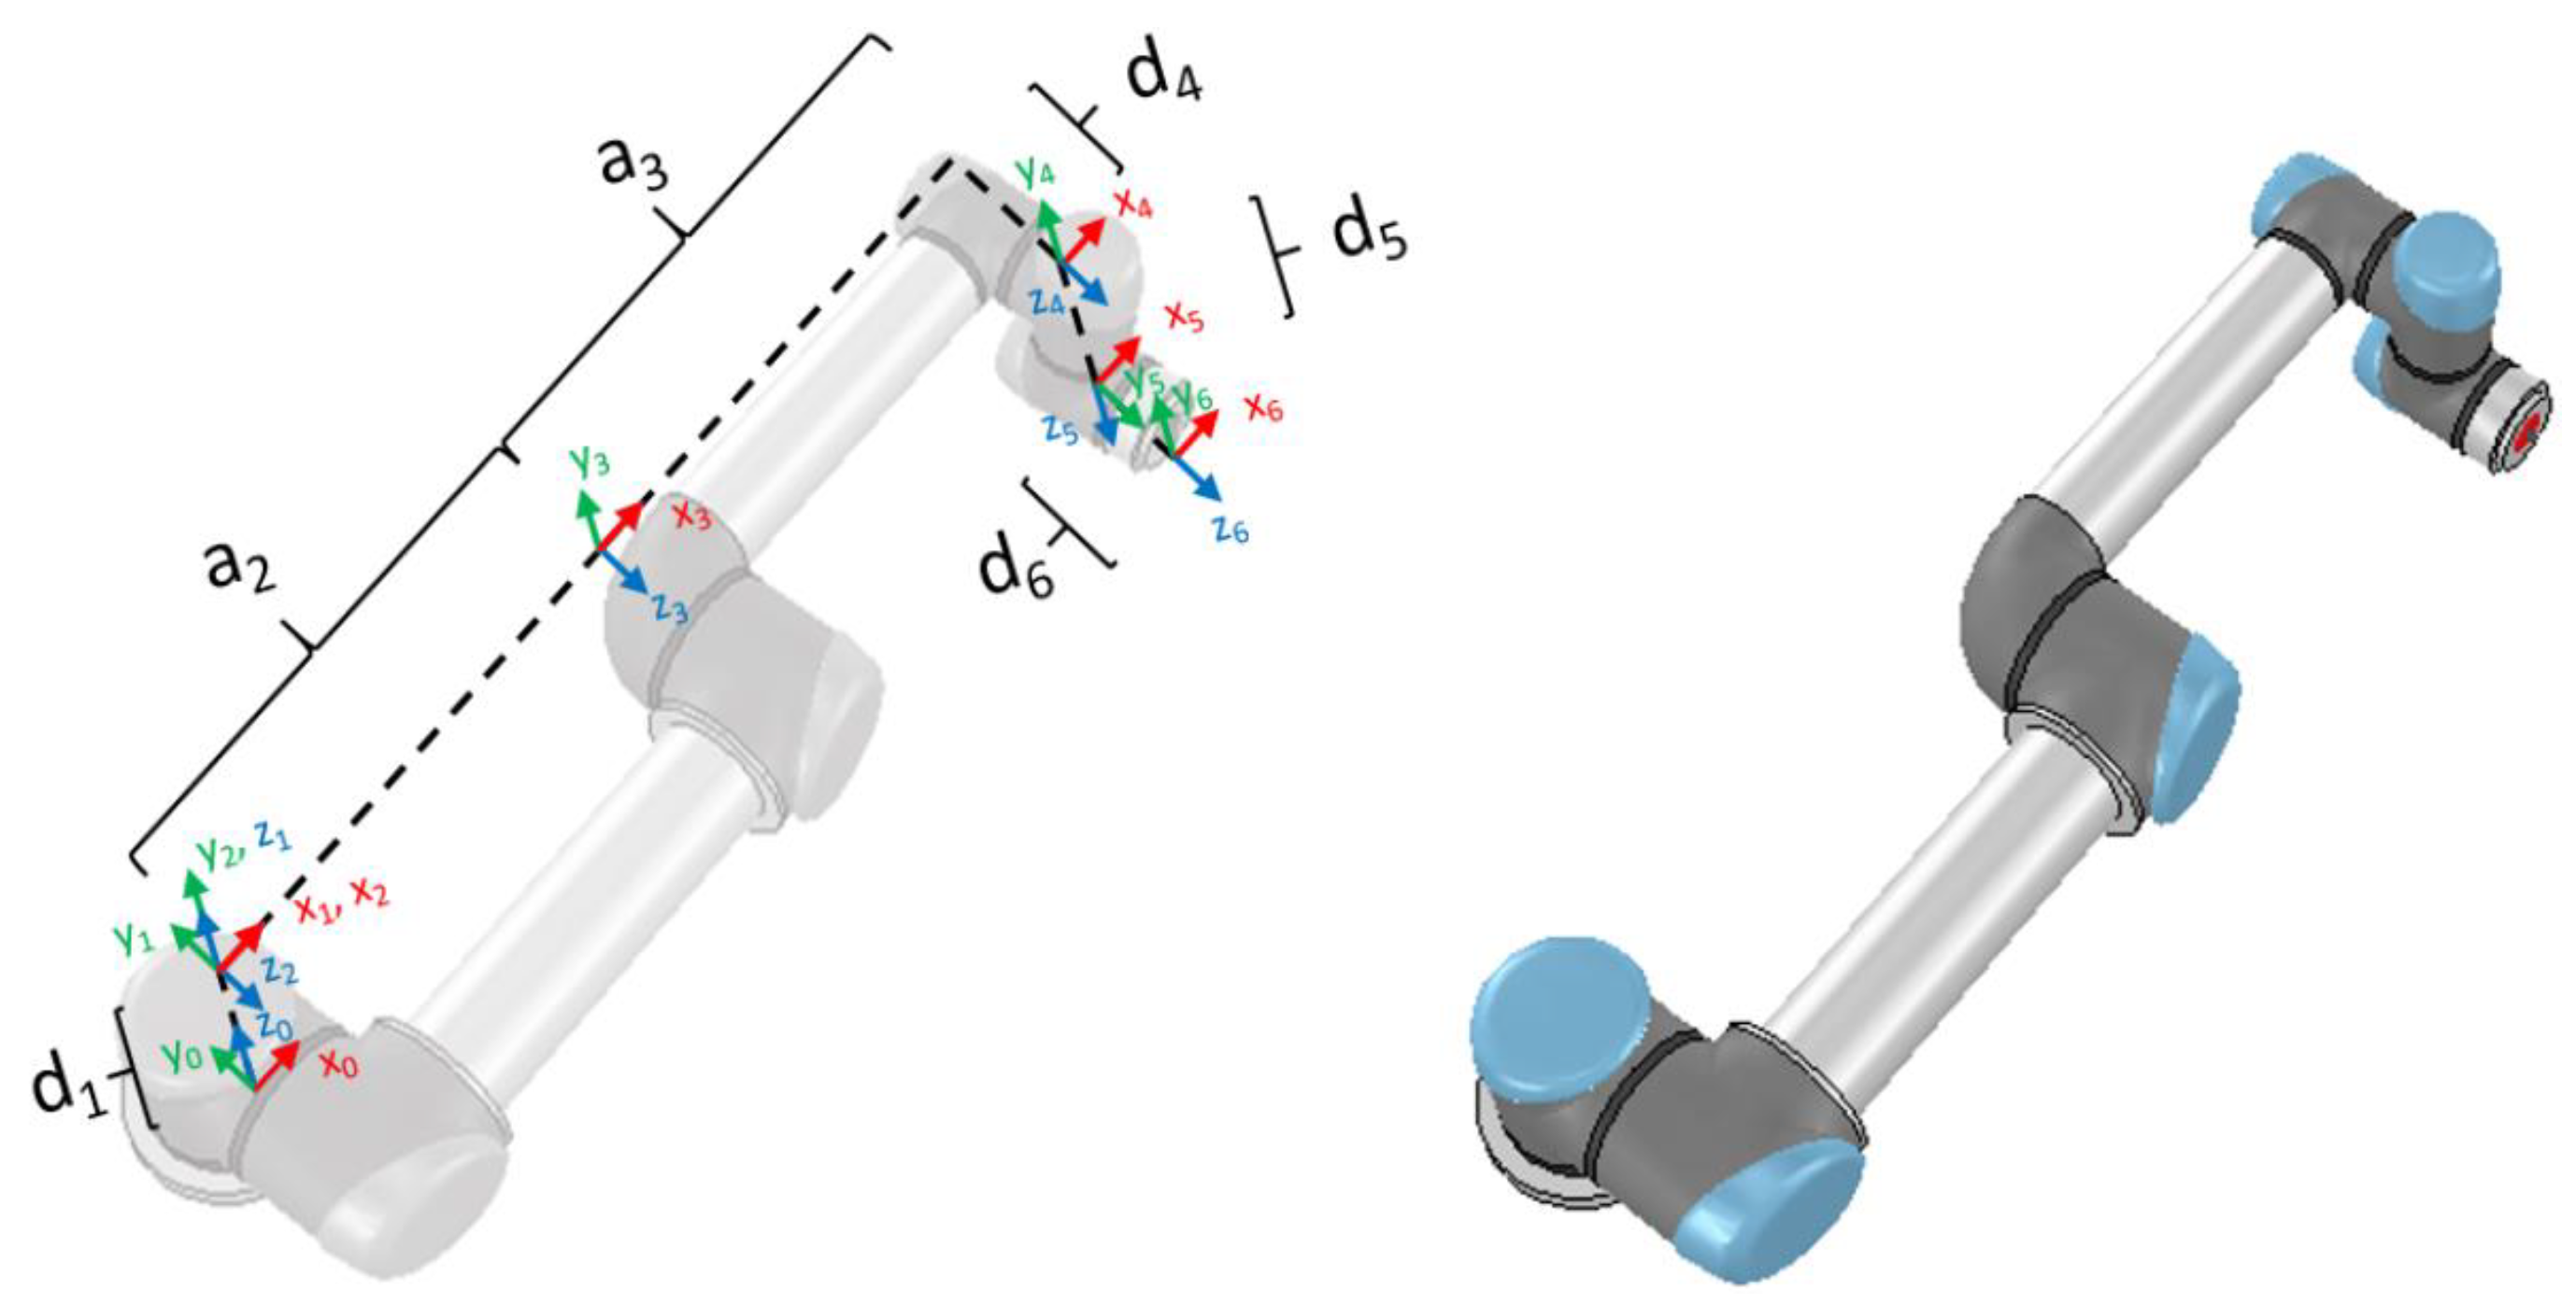 Robotics | Free Full-Text | Virtual UR5 Robot for Online Learning of  Inverse Kinematics and Independent Joint Control Validated with FSM  Position Control